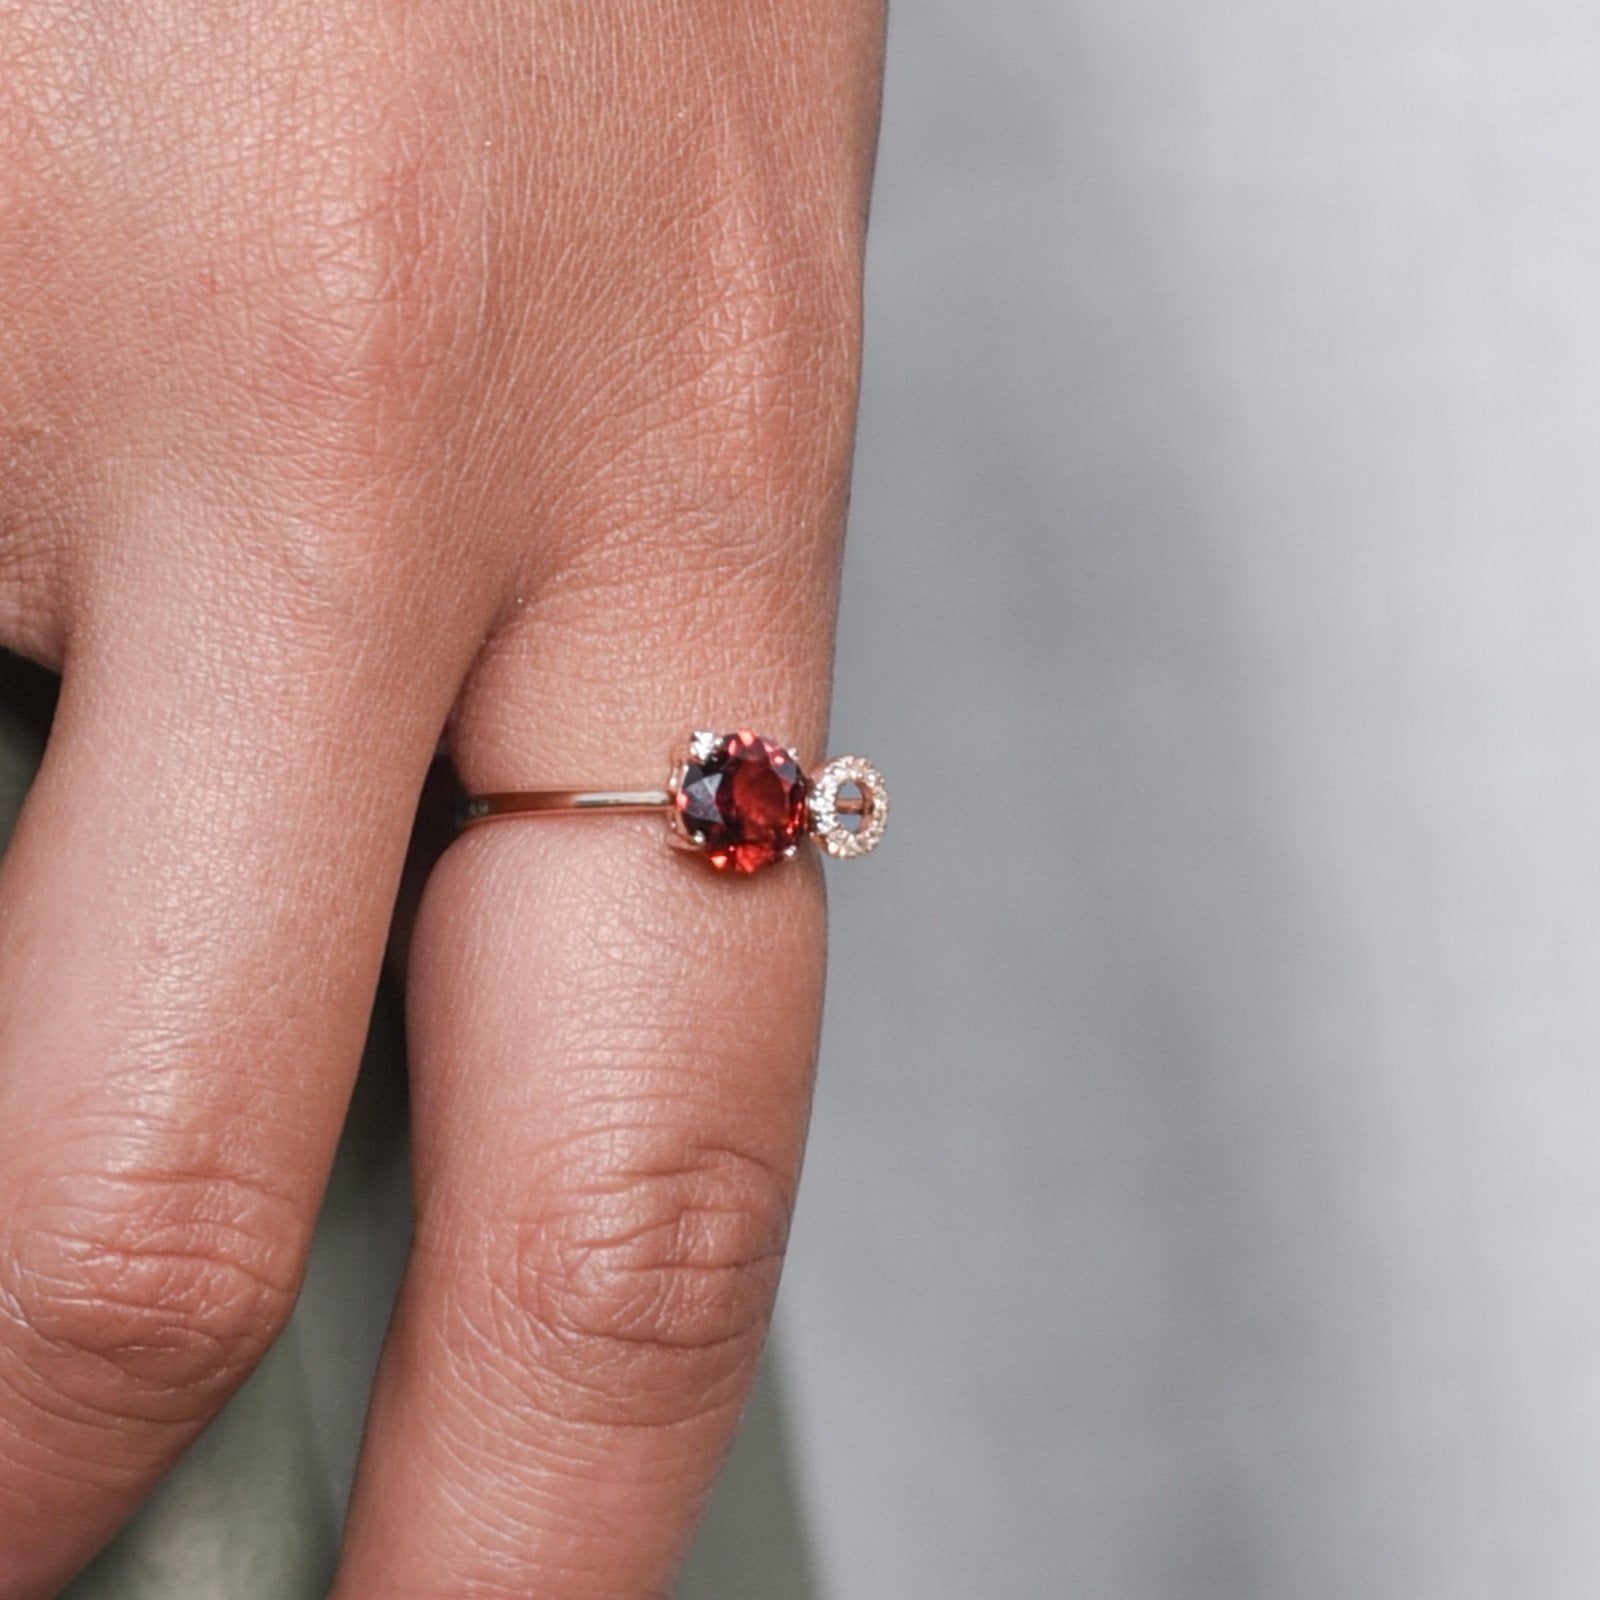 Stacked Diamond and Garnet Solitaire Cocktail Ring Rings Estella Collection #product_description# 17550 14k Birthstone Diamond #tag4# #tag5# #tag6# #tag7# #tag8# #tag9# #tag10# 14K Rose Gold 6